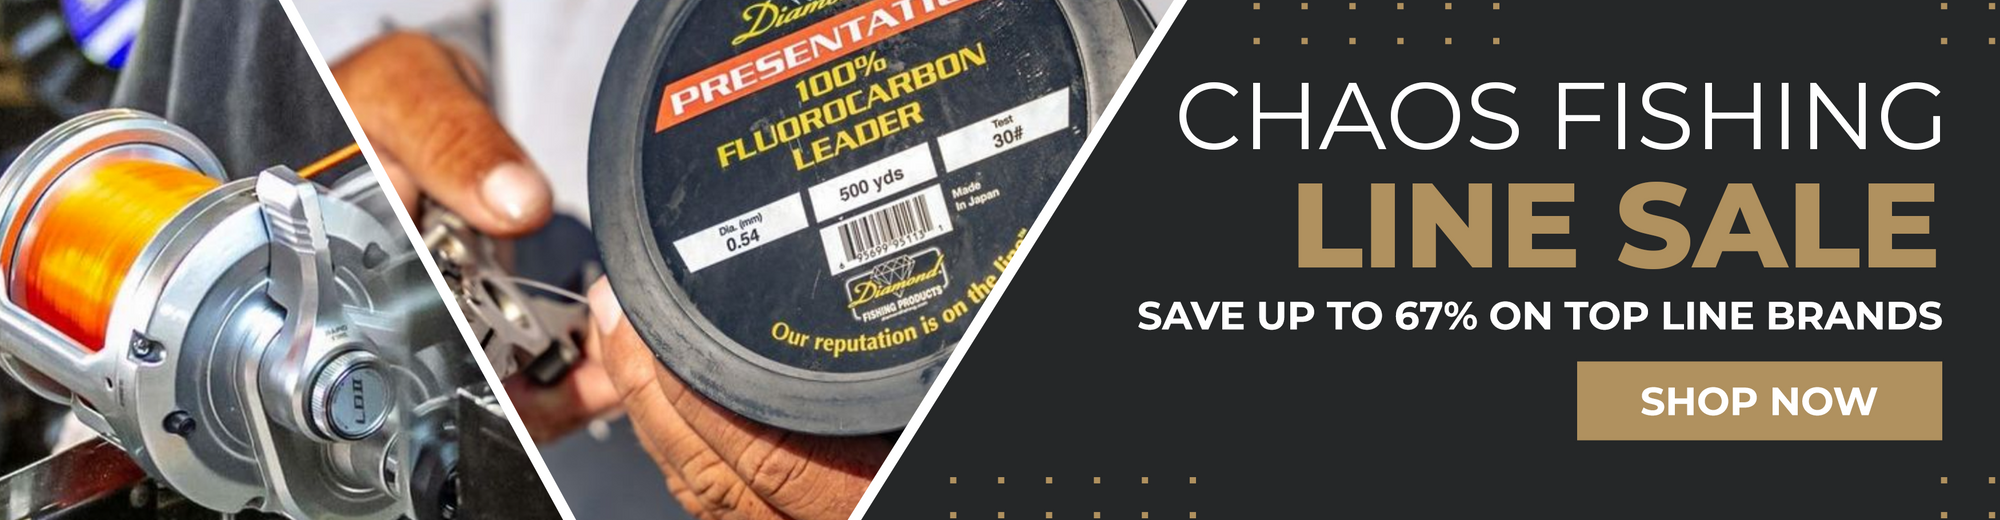 CHAOS Fishing Line Sale Save up to 67% on top line brands.  SHOP NOW button.  Image of fishing line on left.